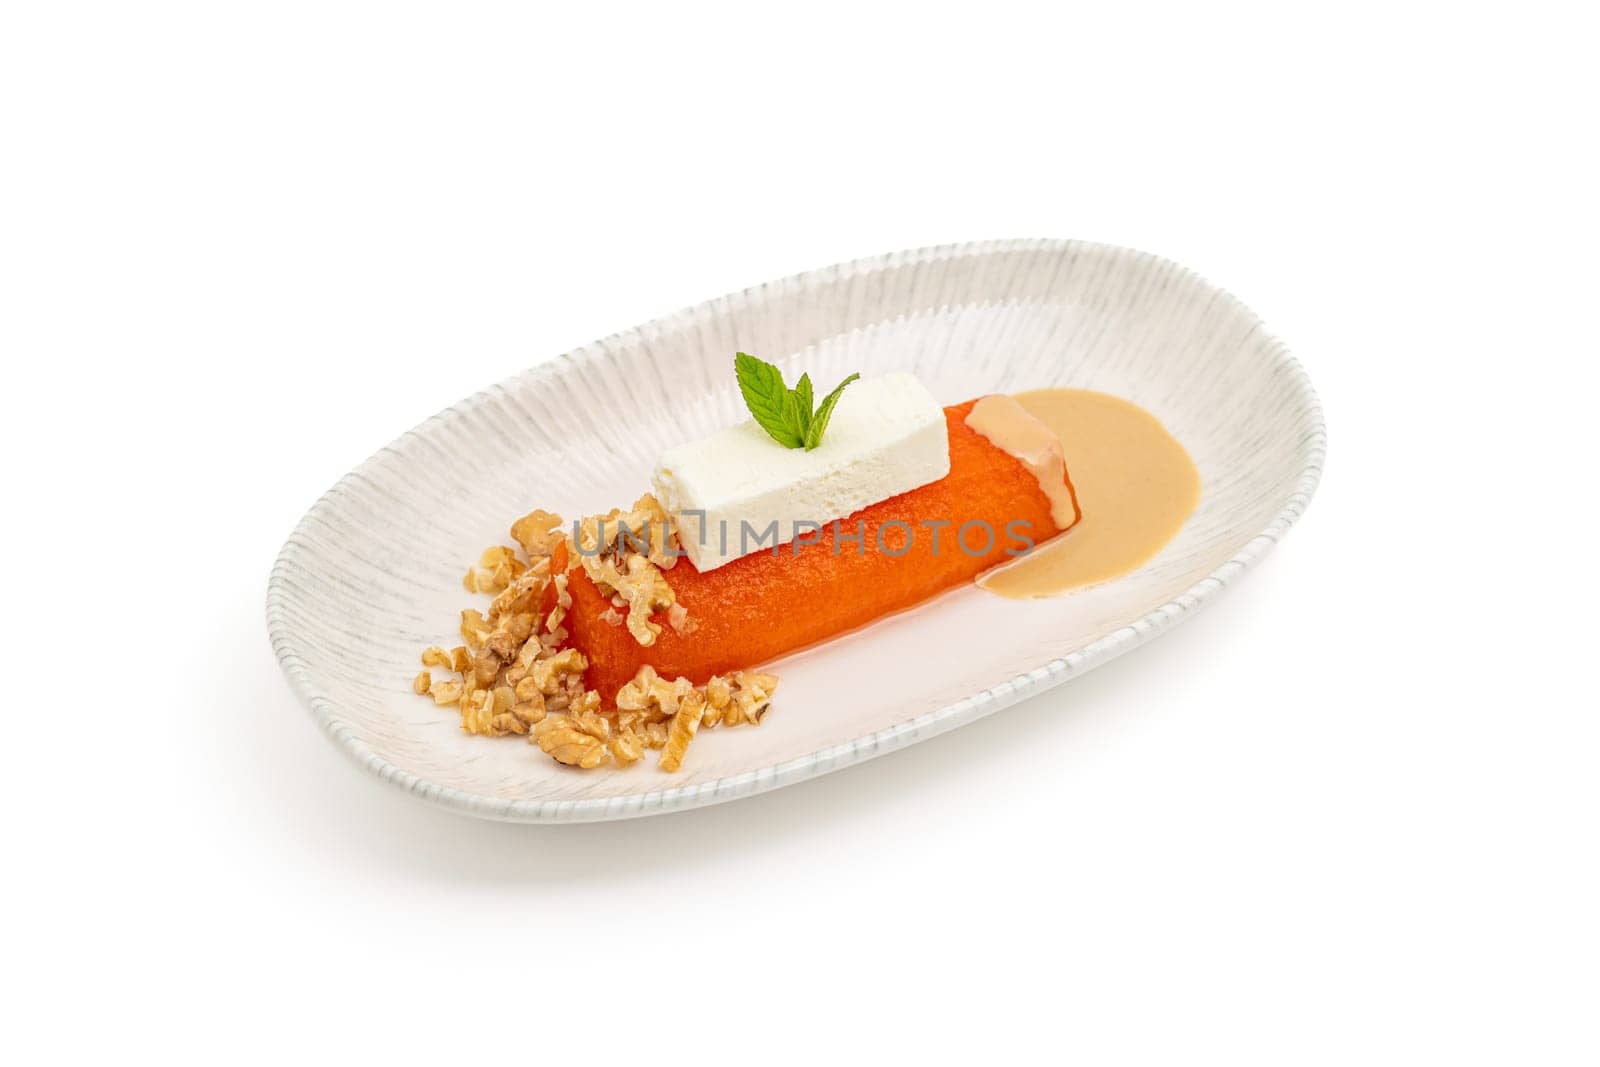 Pumpkin dessert with tahini and walnuts on a white porcelain plate